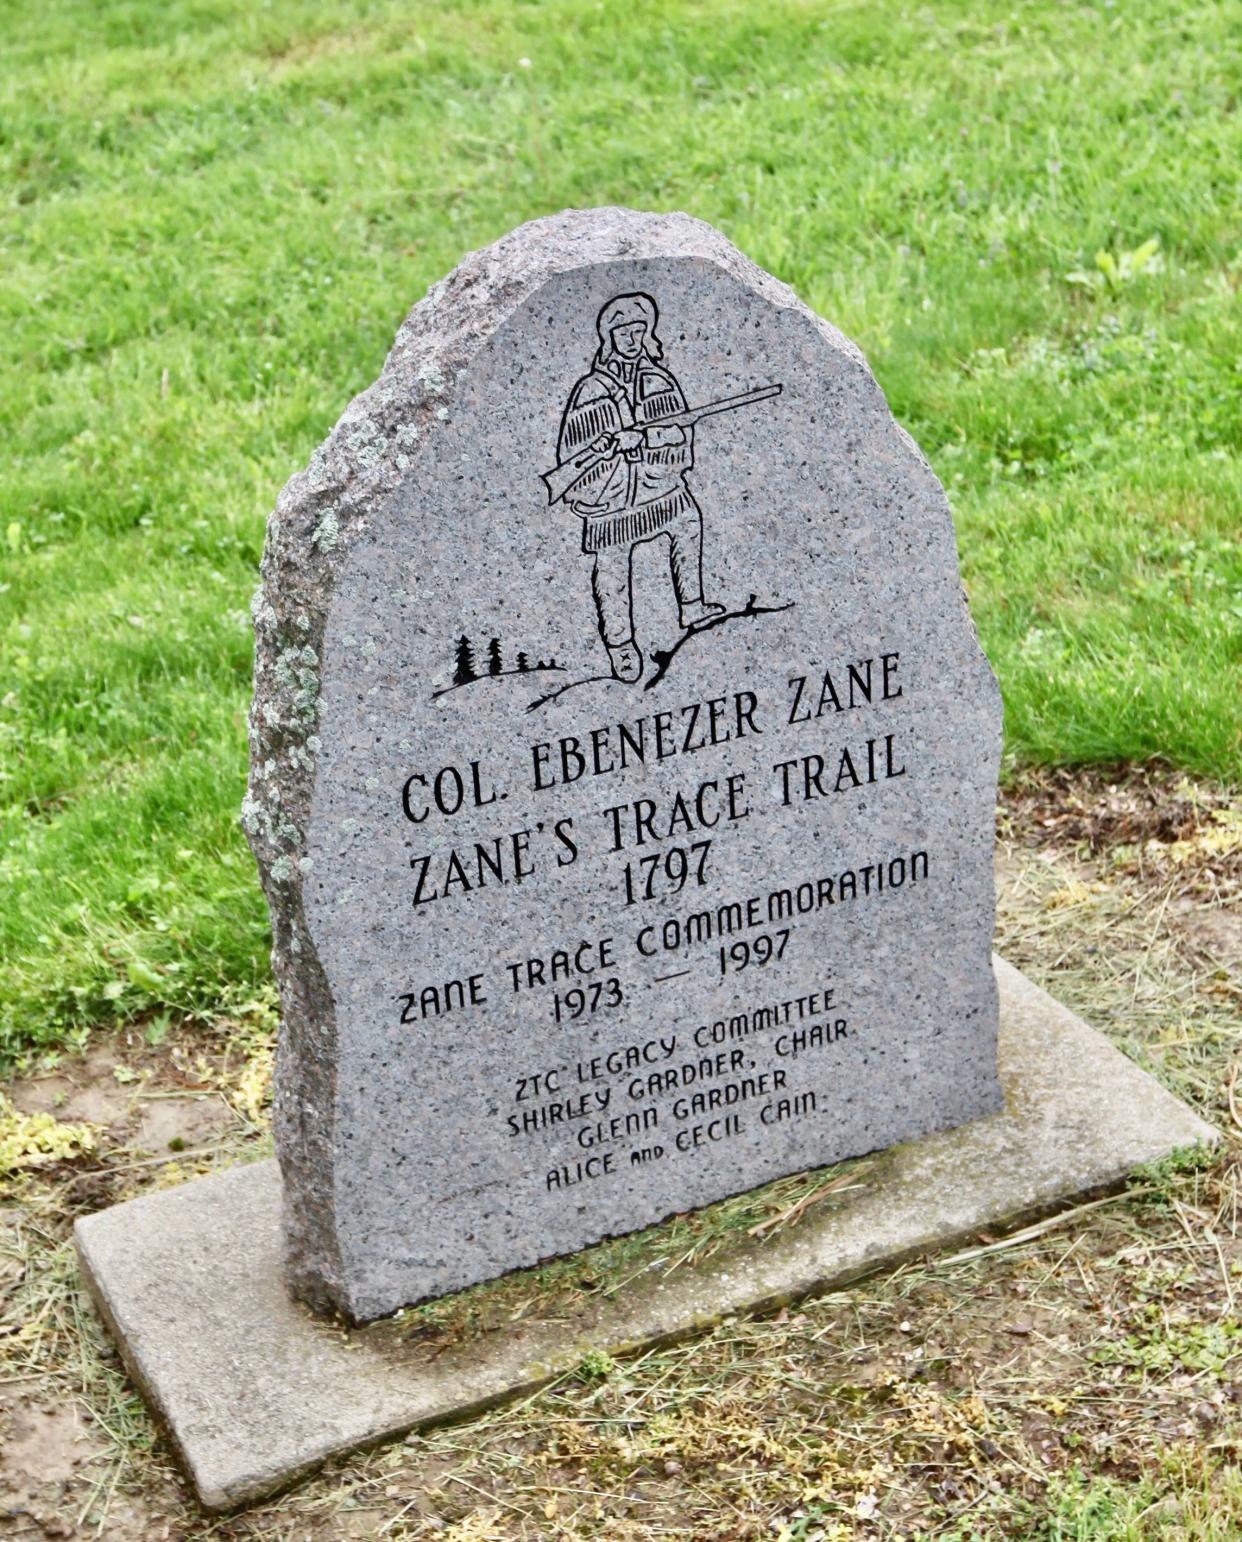 This marker in Zanesville was erected 25 years ago for the bicentennial of Zane's Trace.